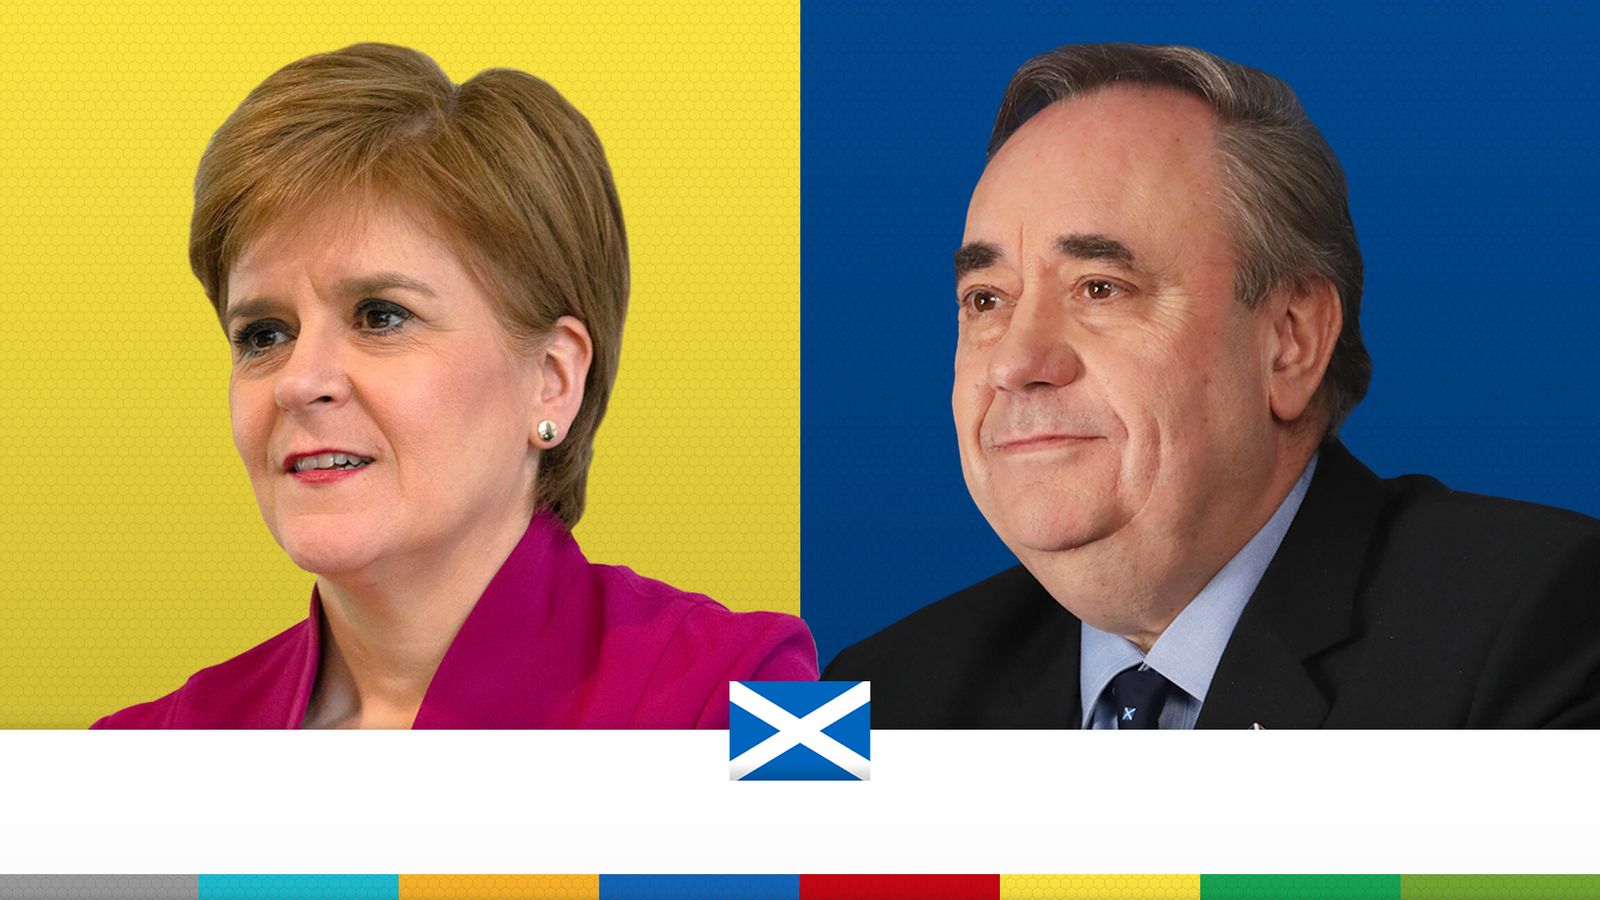 Elections 2021: Five things to look out for in the Scottish results